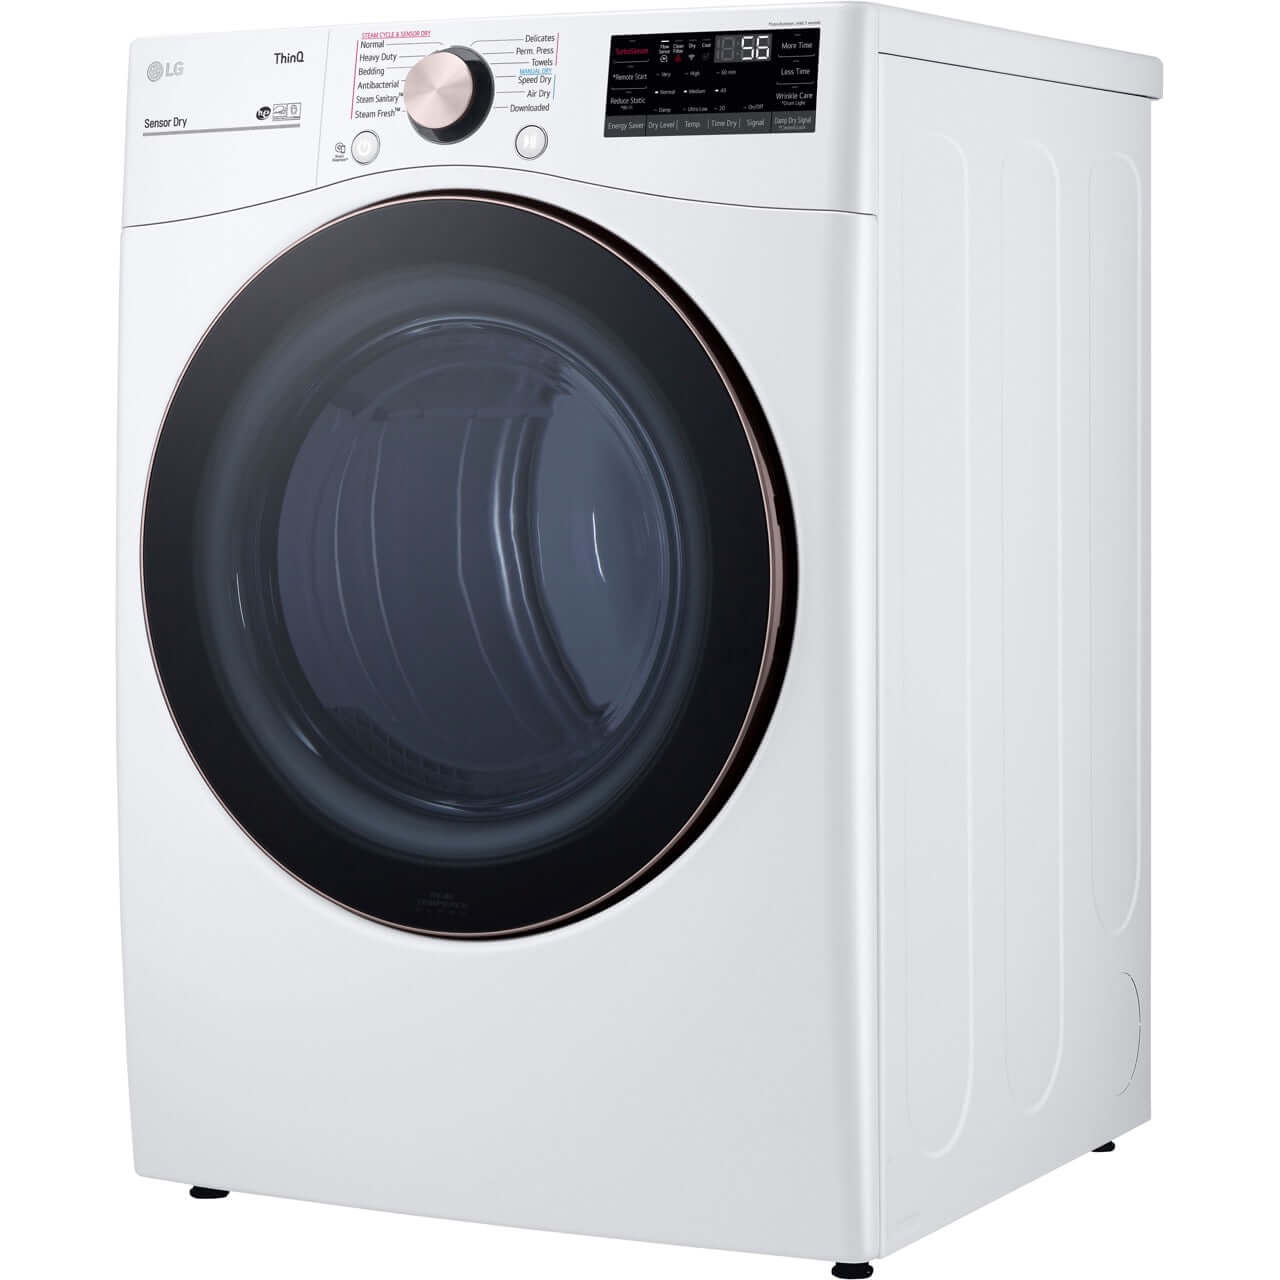 LG 27 In. 7.4-Cu. Ft. Front Load Gas Dryer with TurboSteam and Built-In Intelligence in White (DLGX4001W)